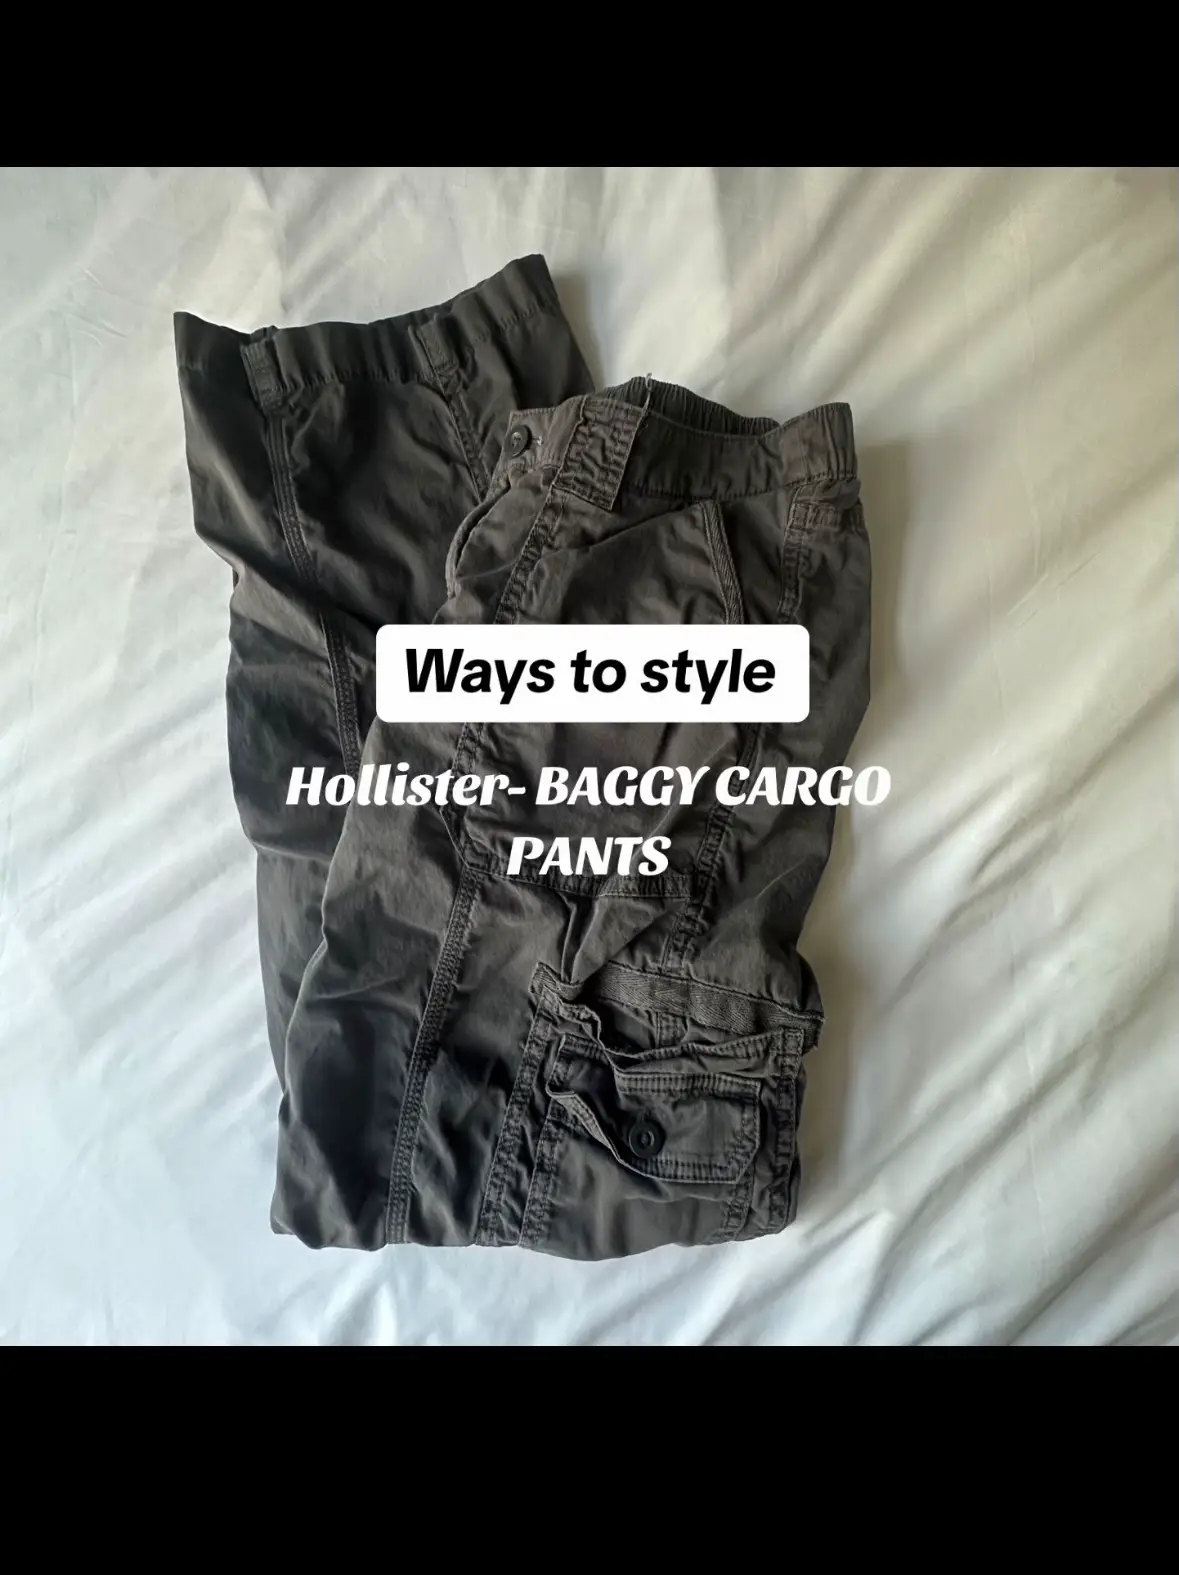 Halara - Cargo pants are seen everywhere on the streets 